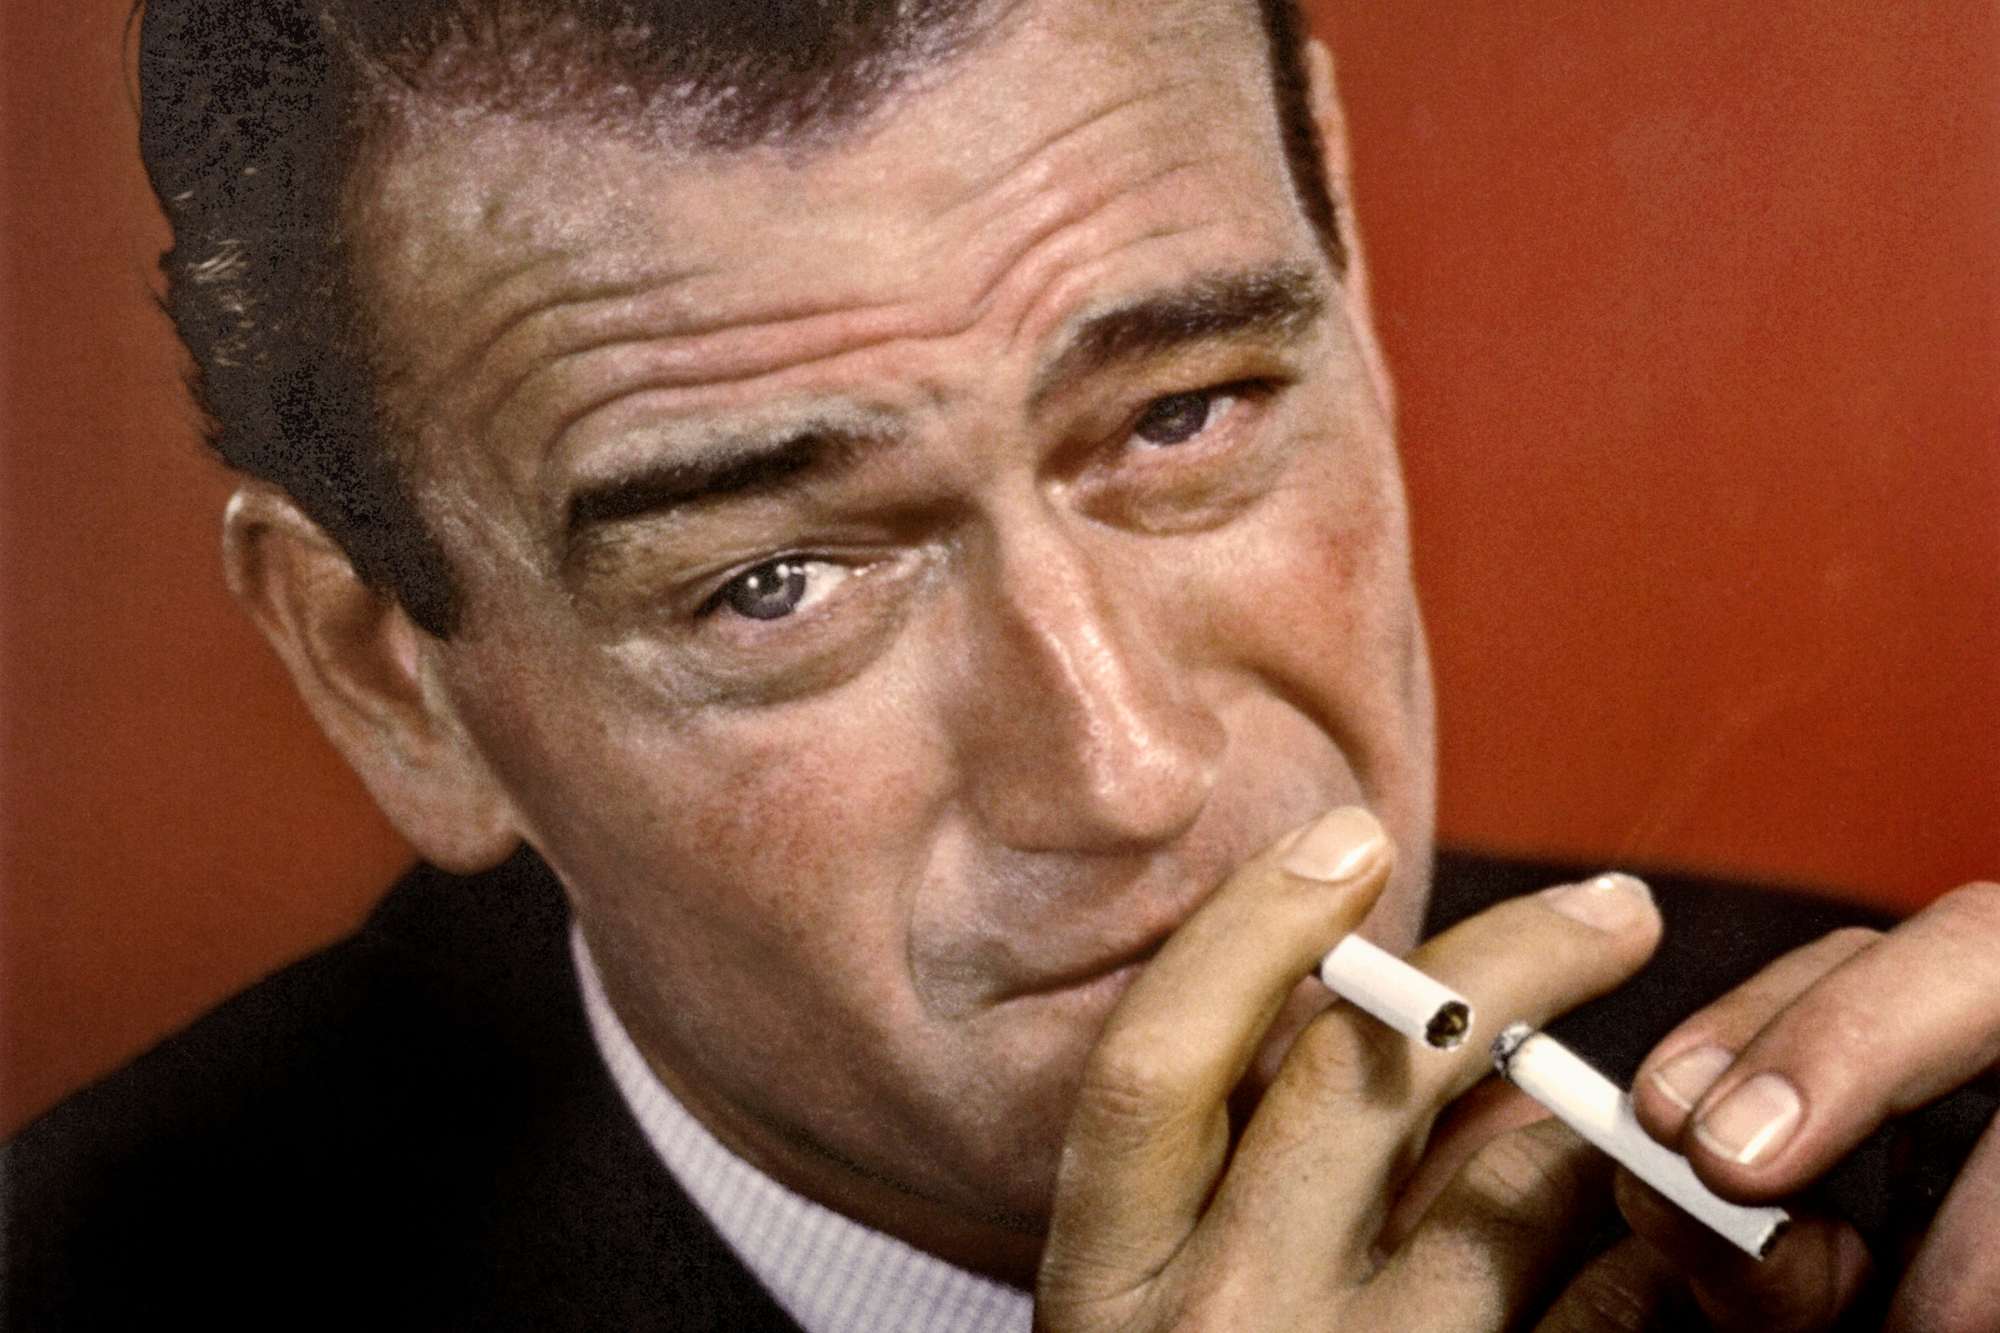 John Wayne image of him lighting his cigarette with another one, looking at the camera in a portrait.